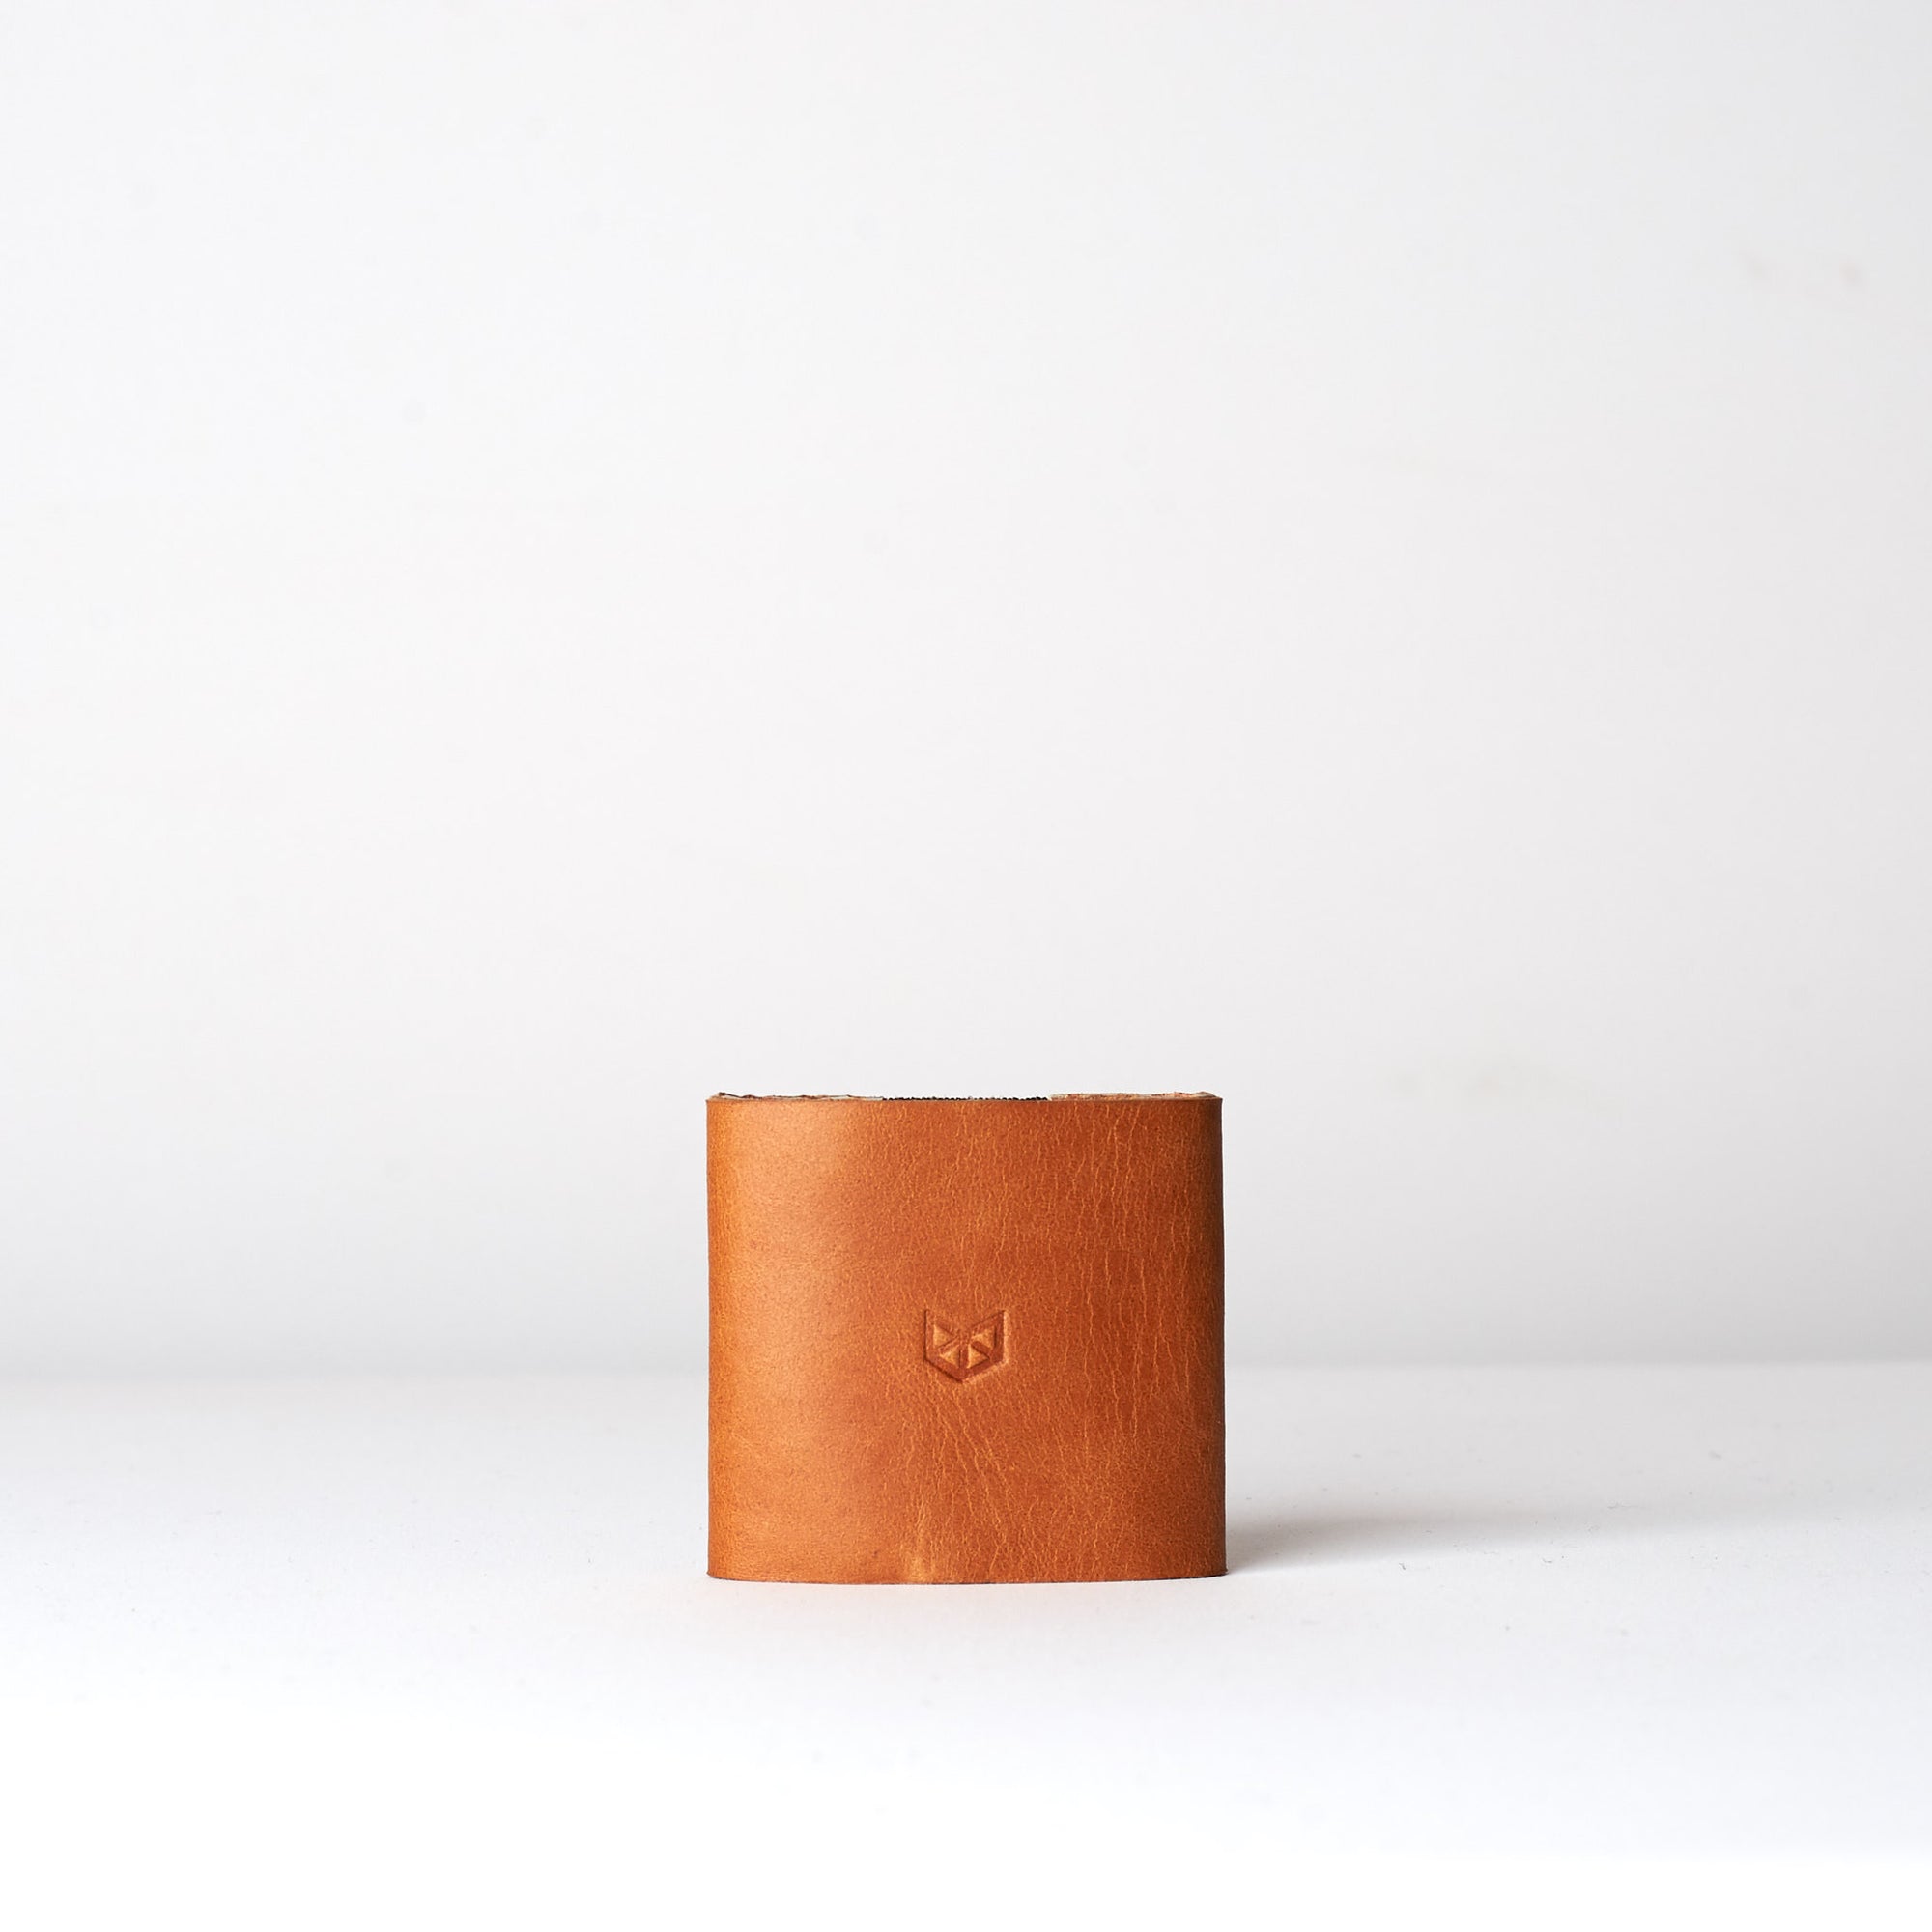 Take out. Leather Habana slim wallet gifts for men handmade accessories. minimalist full grain leather thin wallet. Made by Capra Leather. 